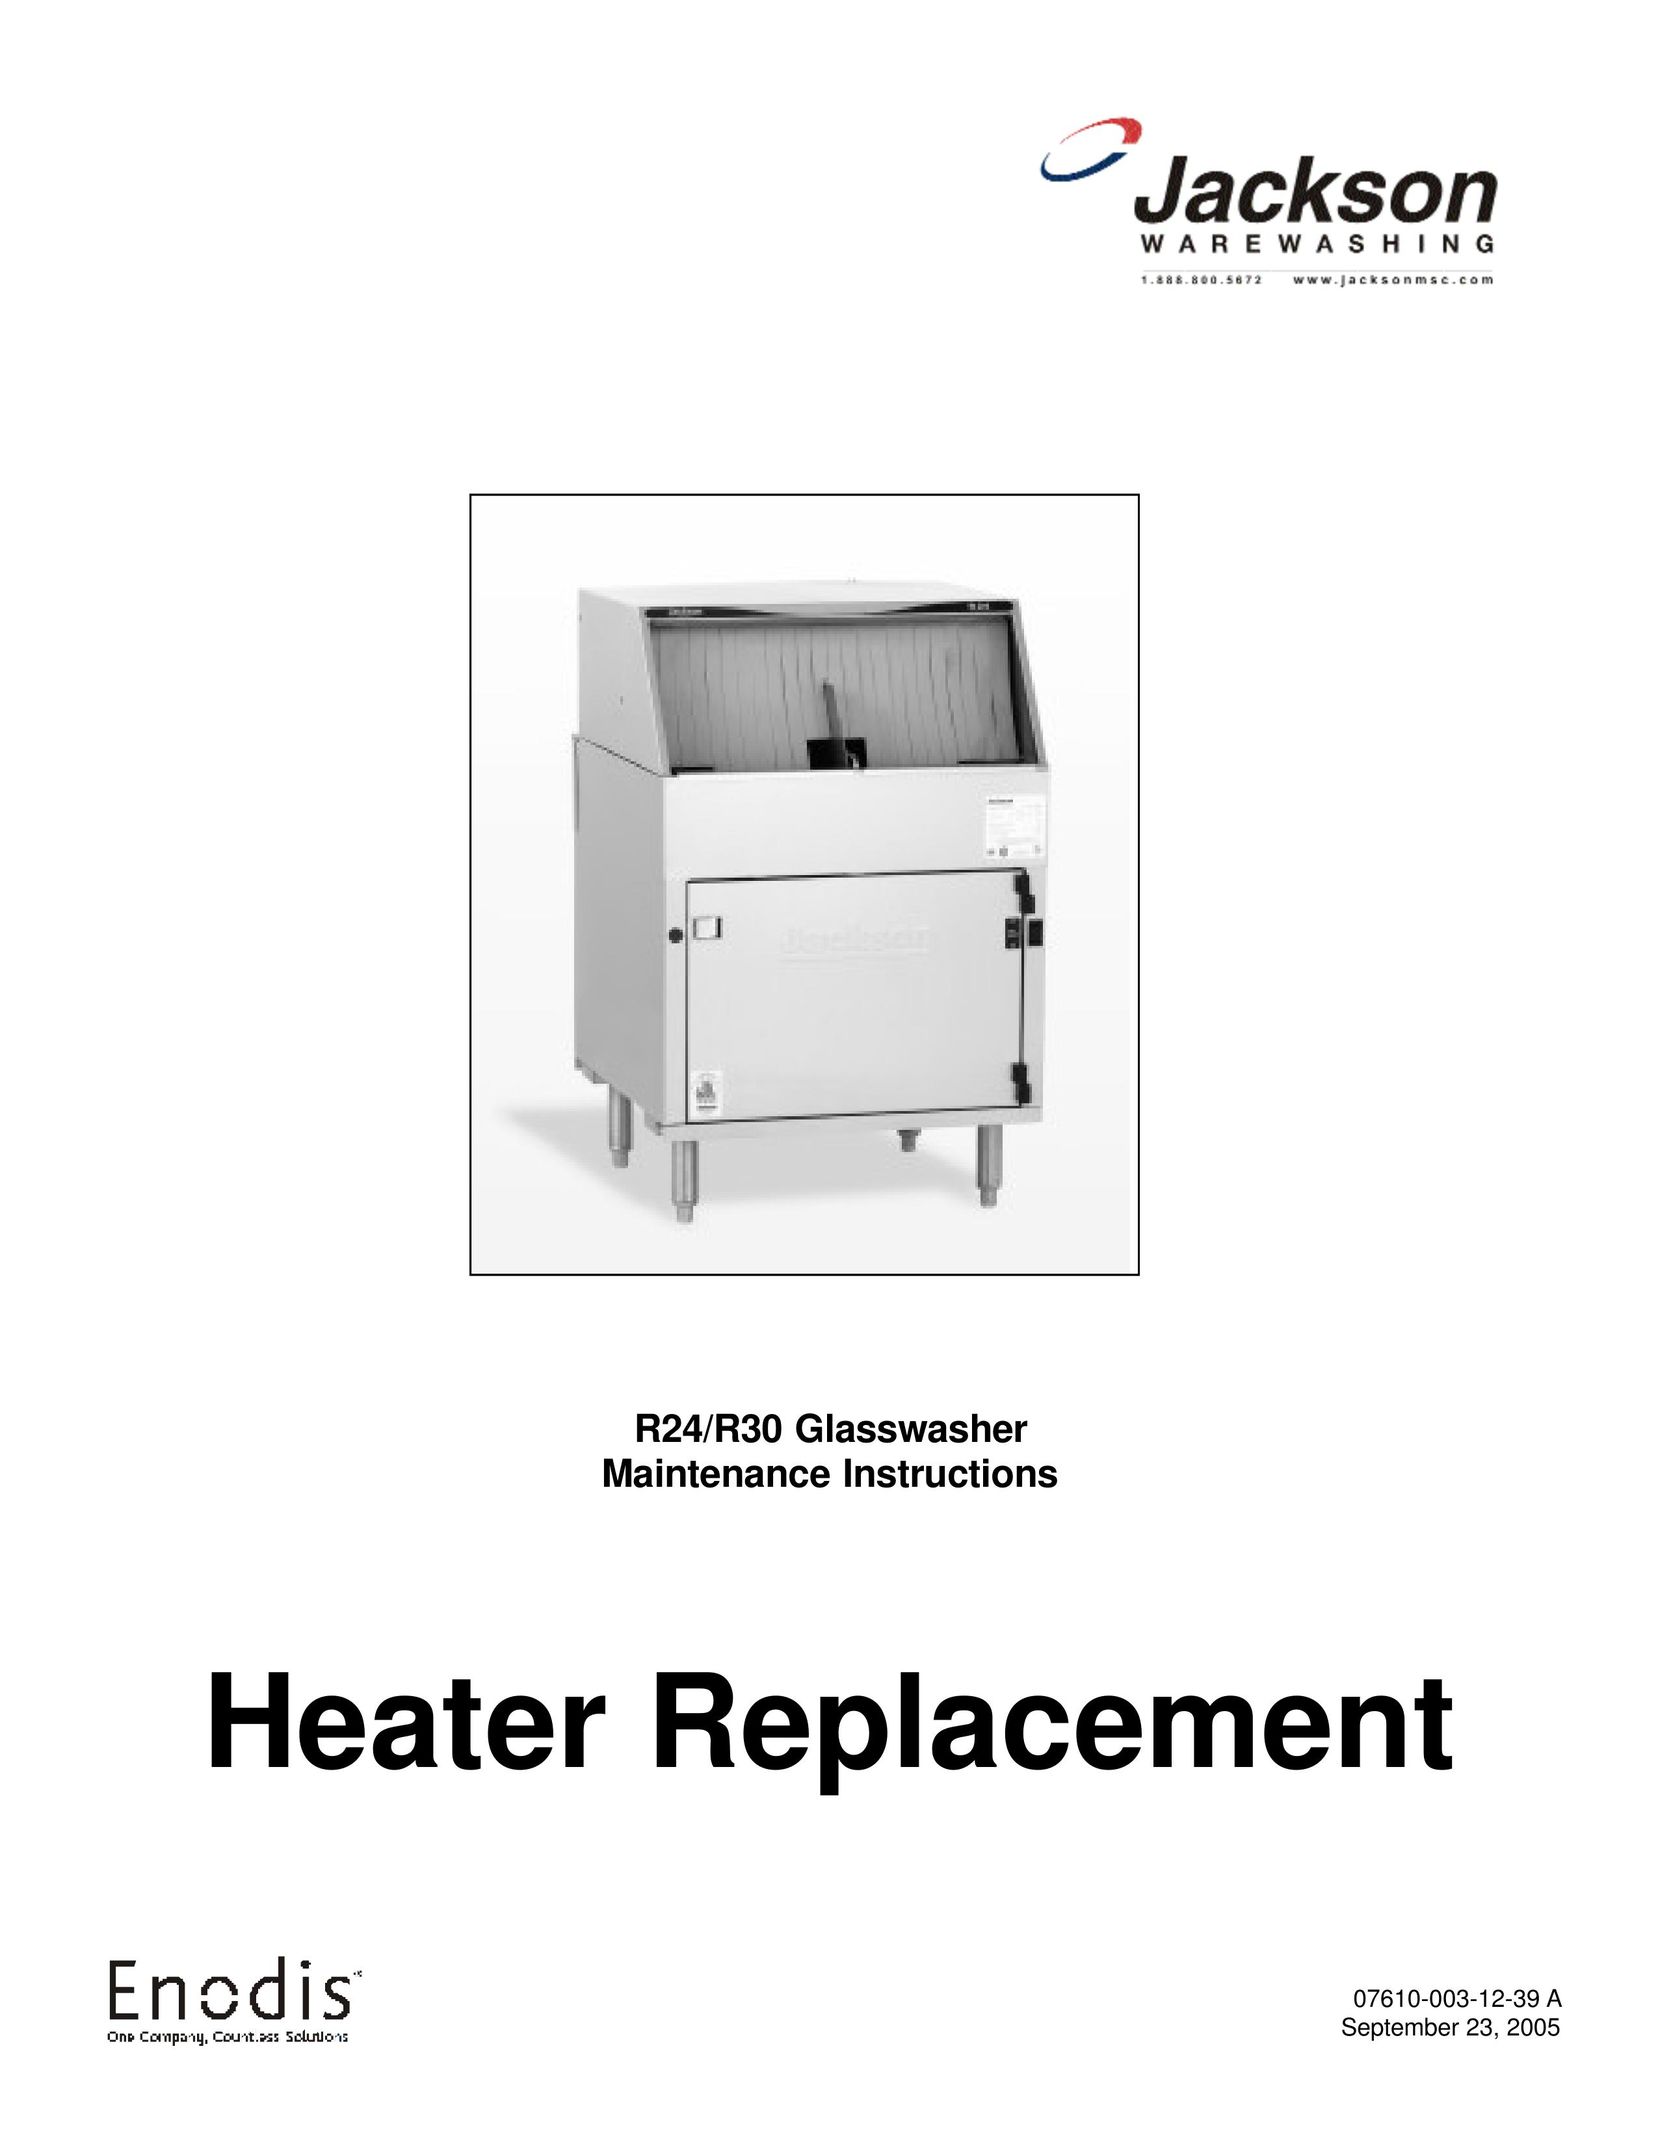 Jackson Heater Replacement Gas Heater User Manual